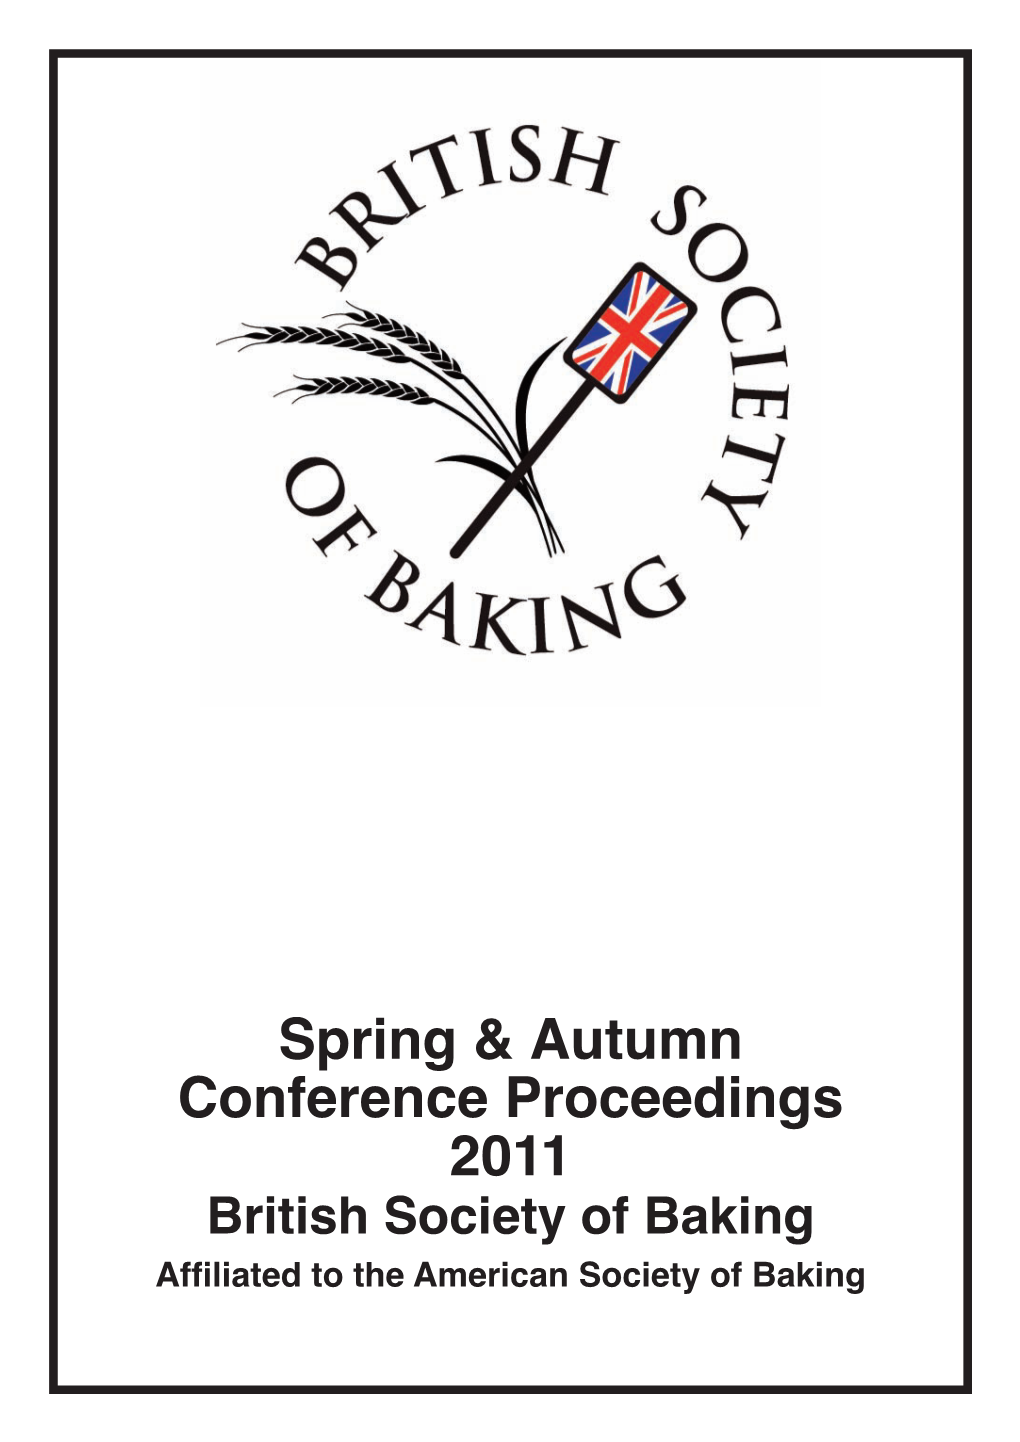 Spring & Autumn Conference Proceedings 2011